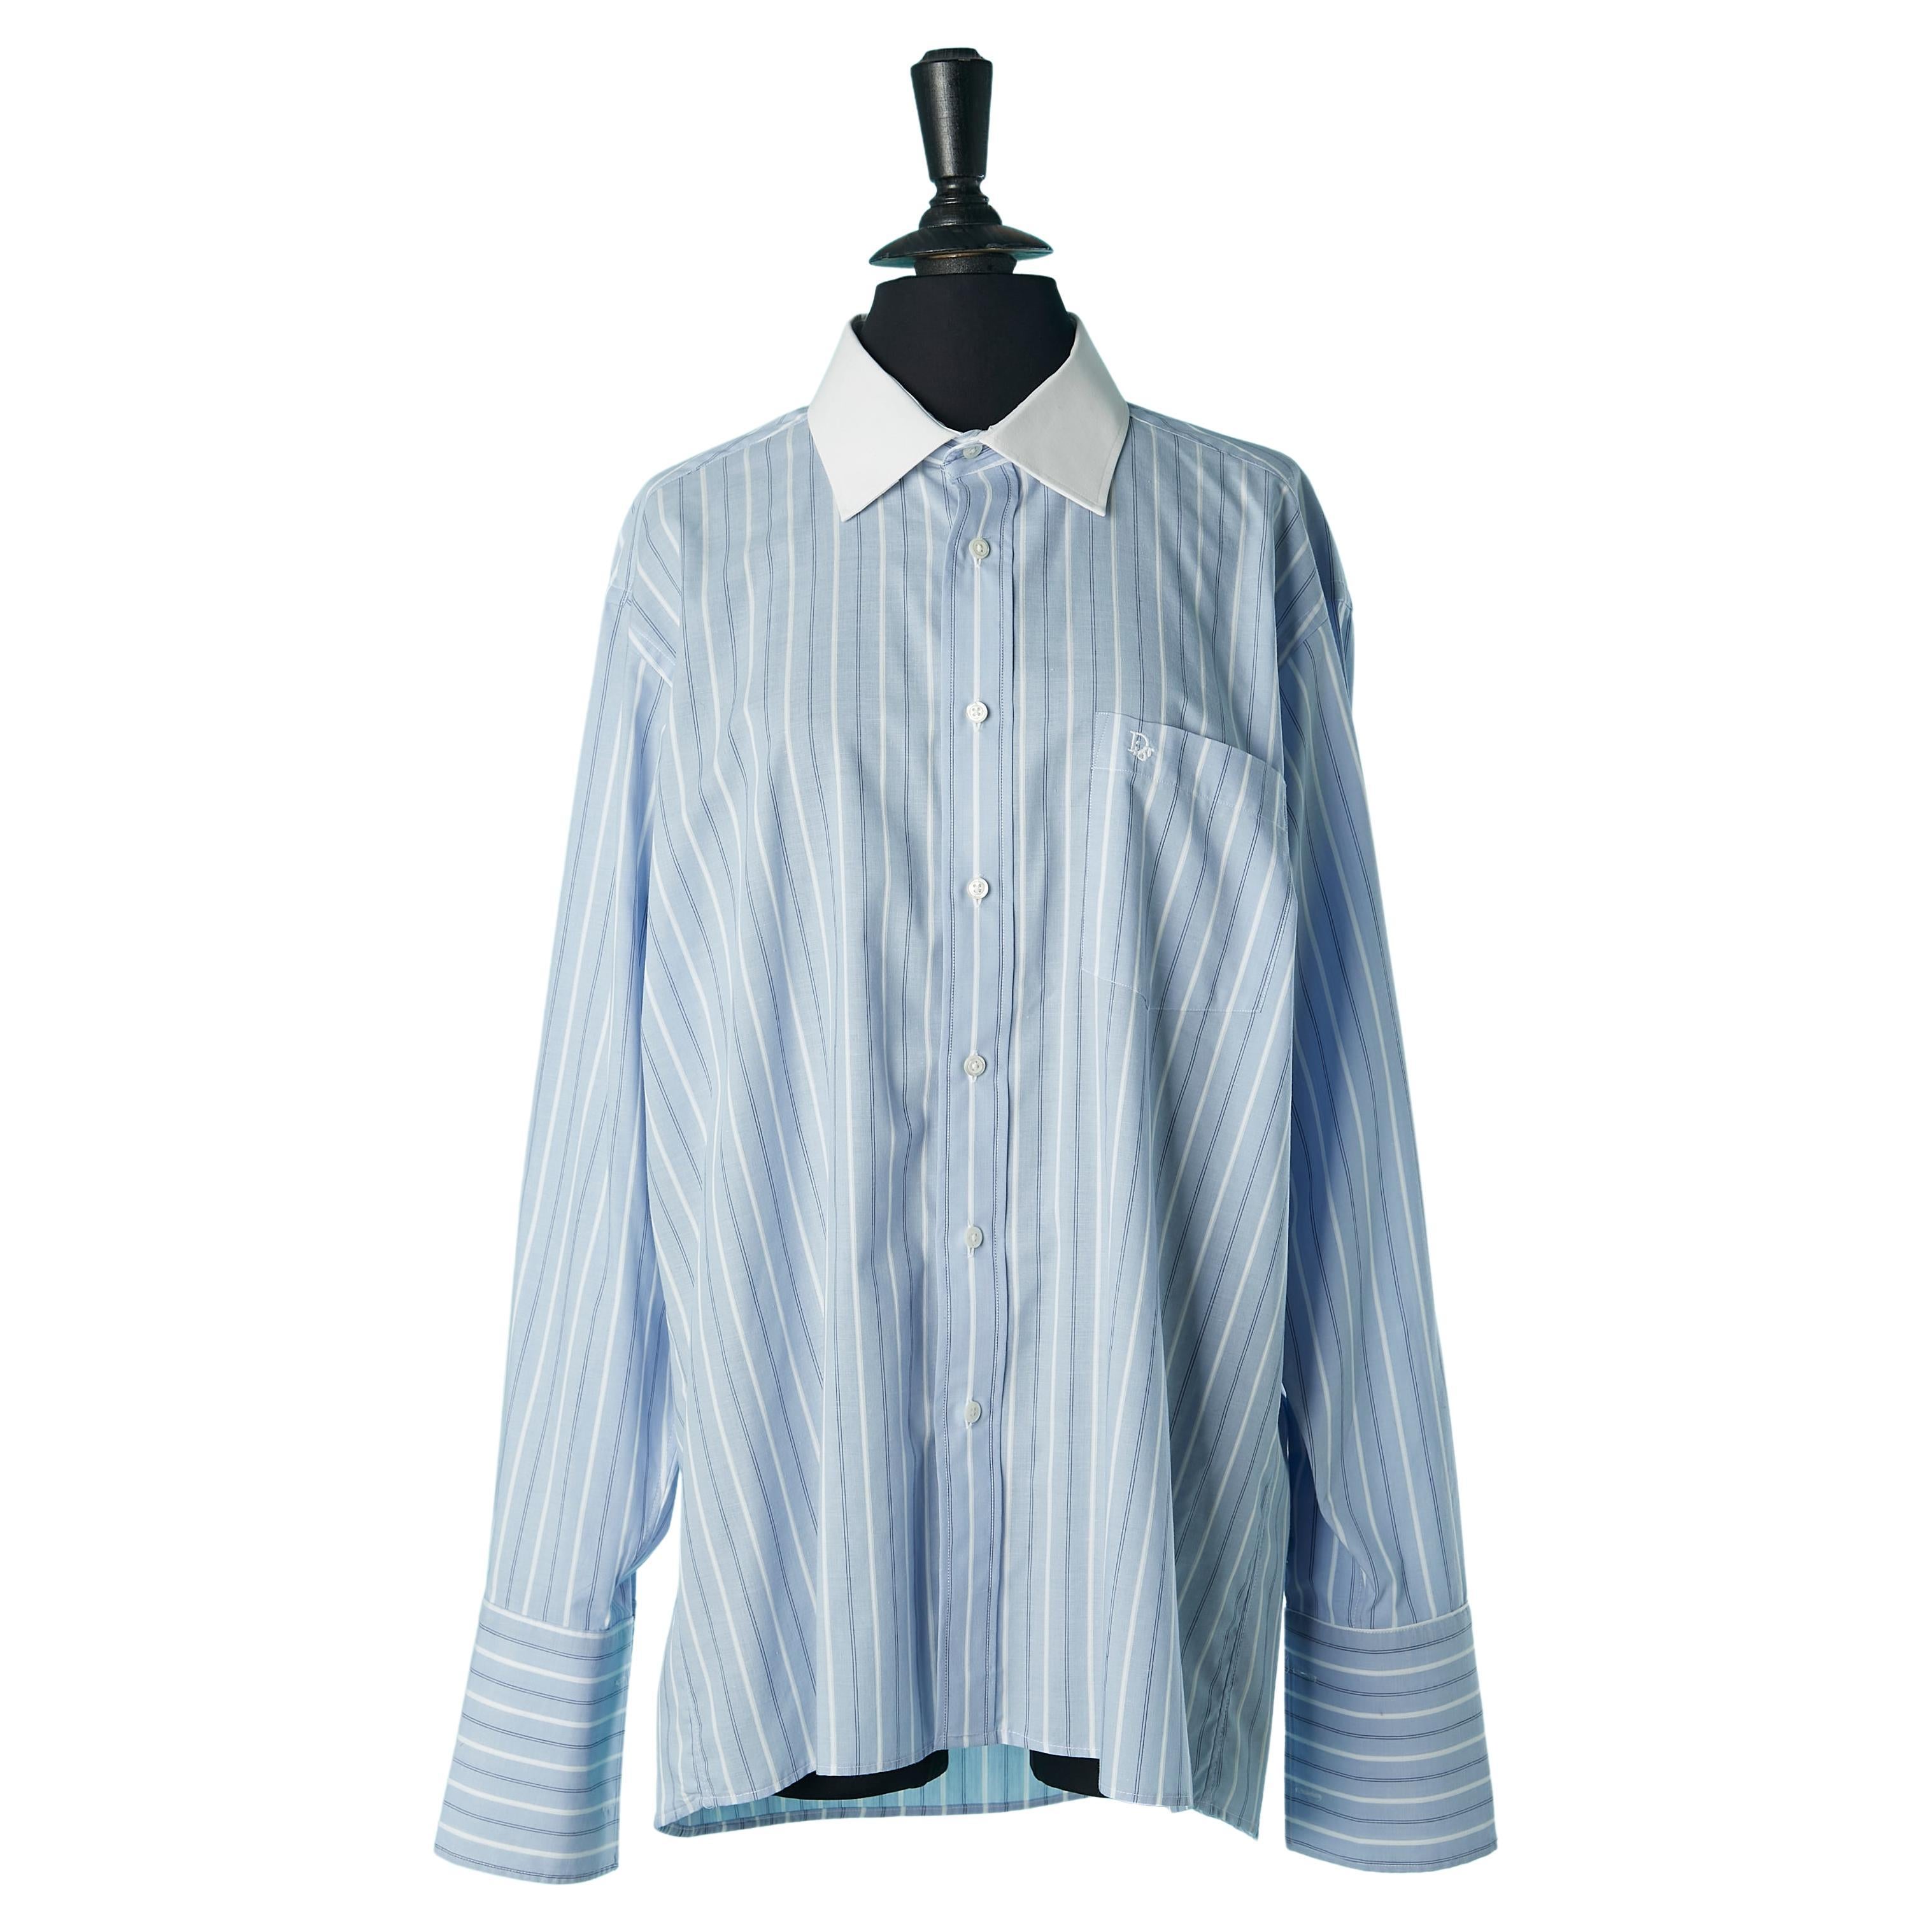 White and pale blue striped shirt with white collar Christian Dior Monsieur 